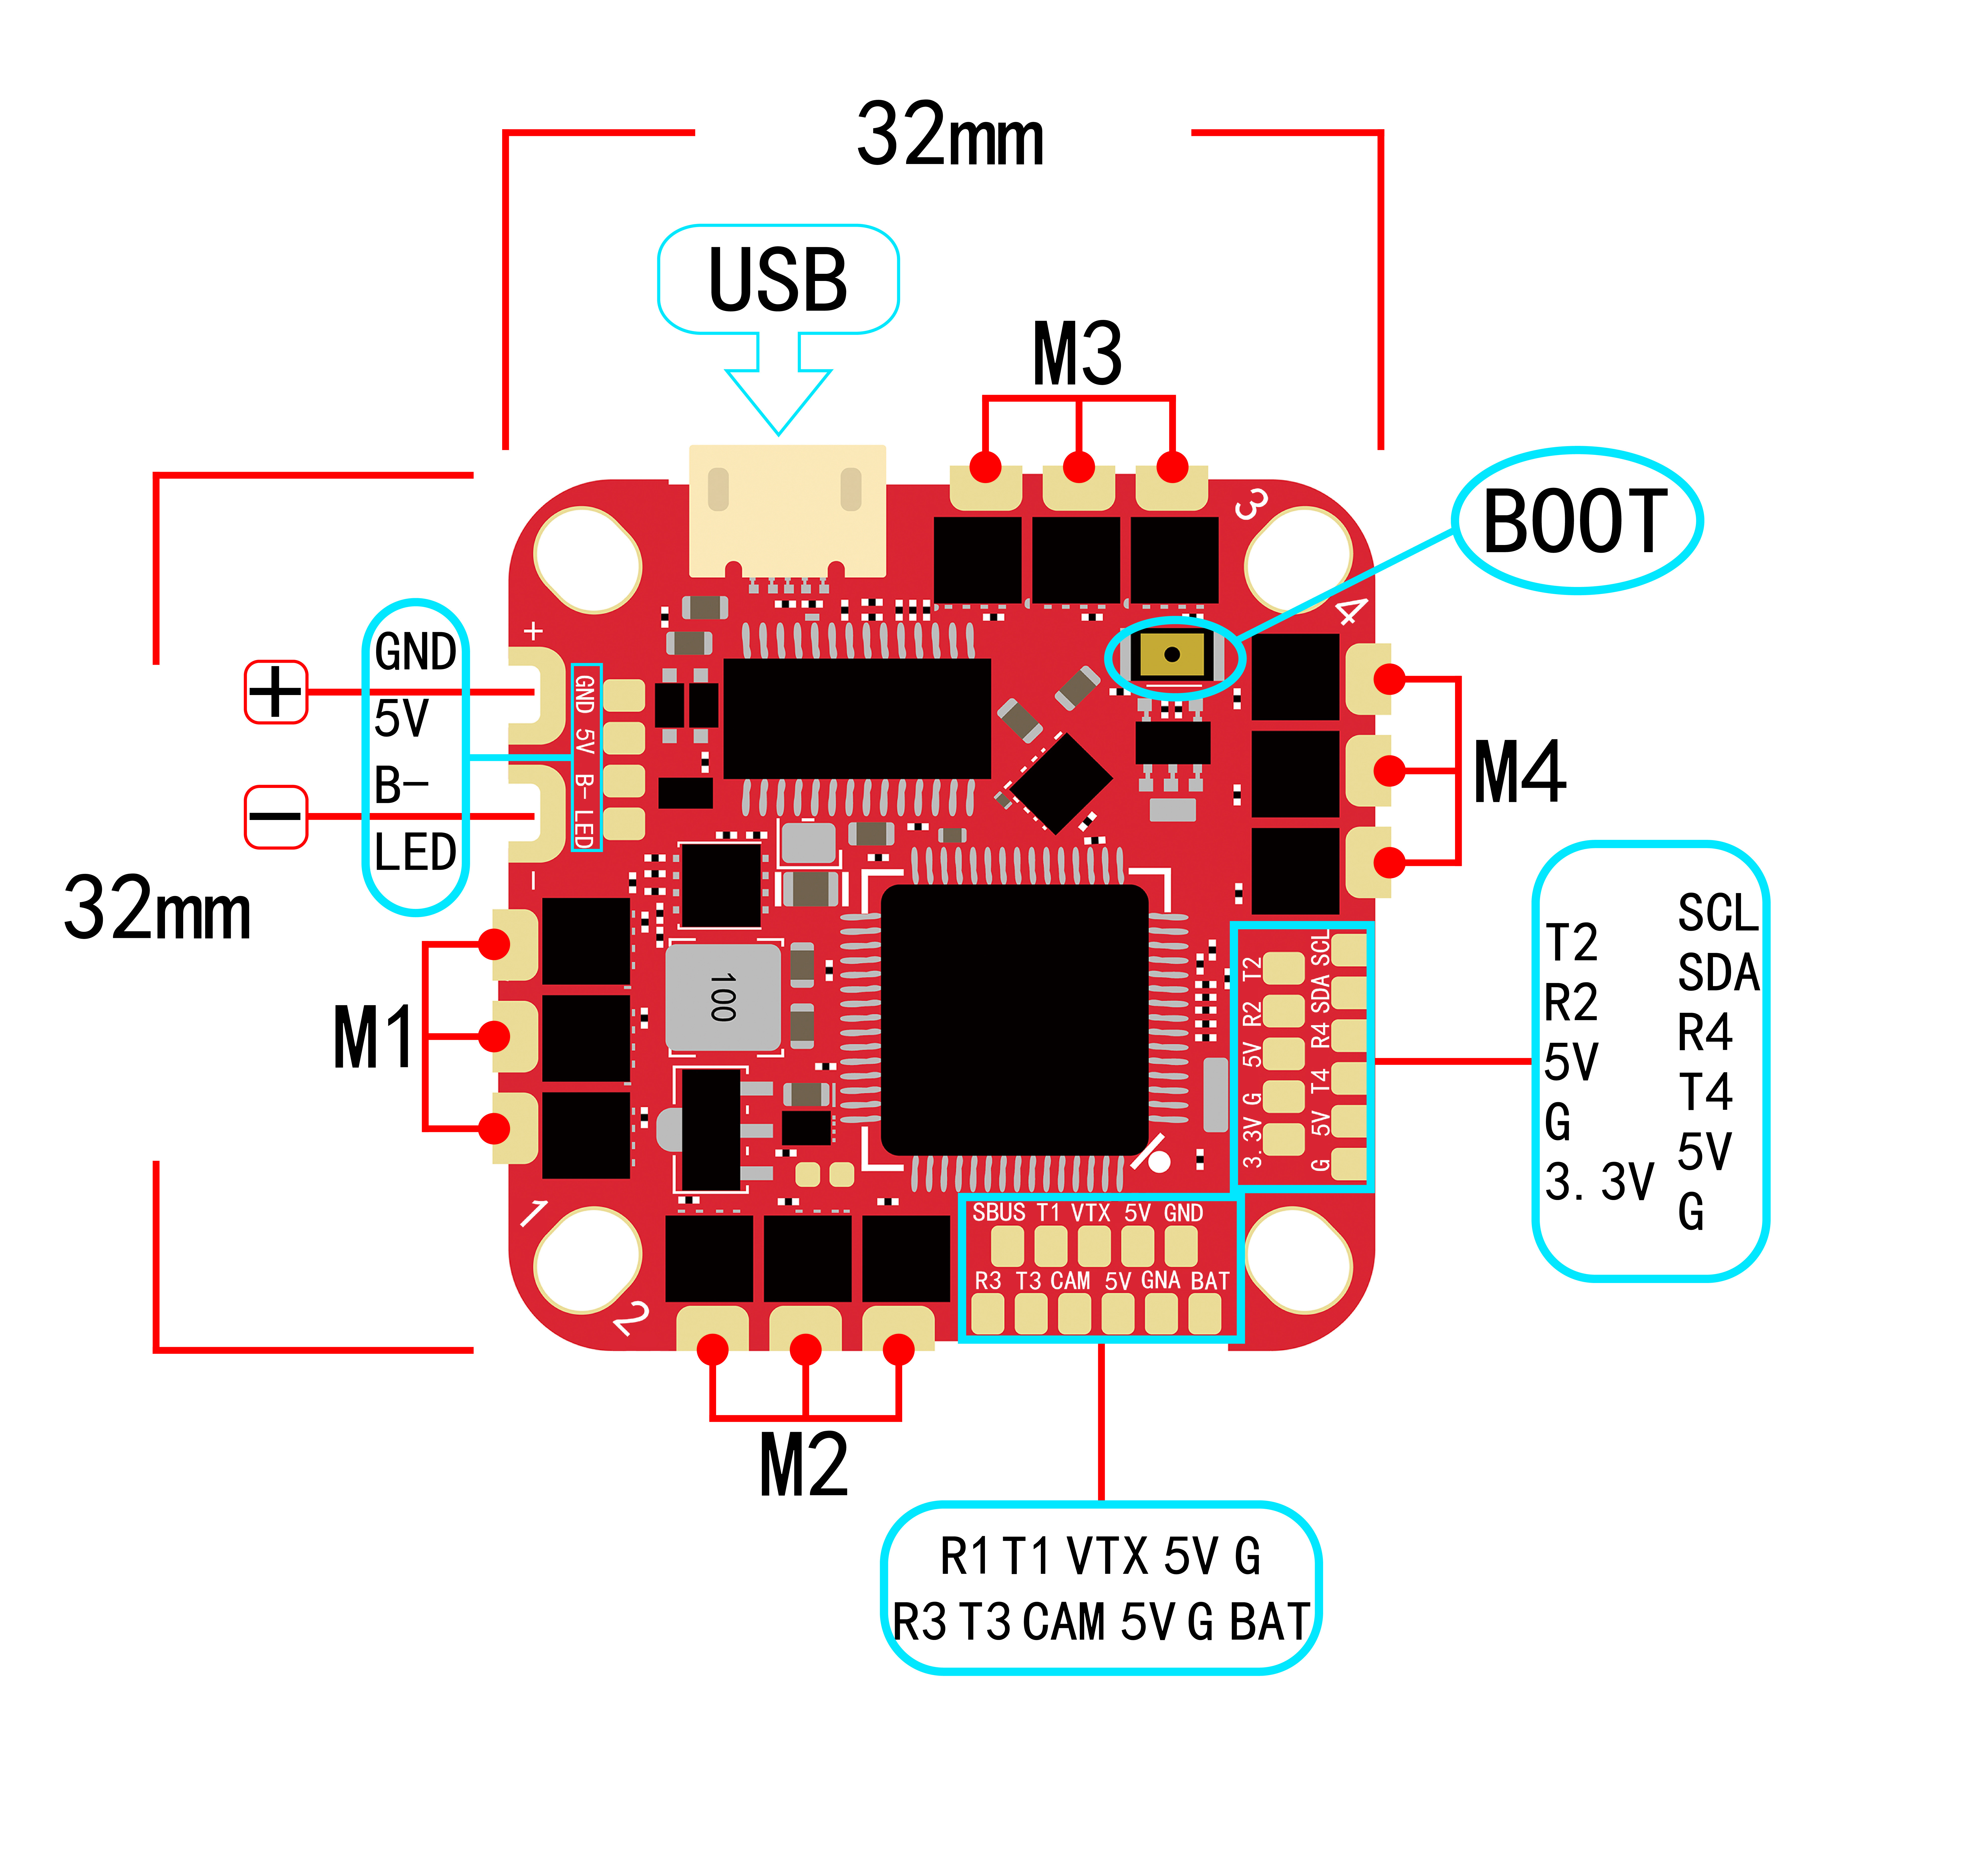 HAKRC 40A/F722 AIO FOR C35/C30 V2 cinewhoop   